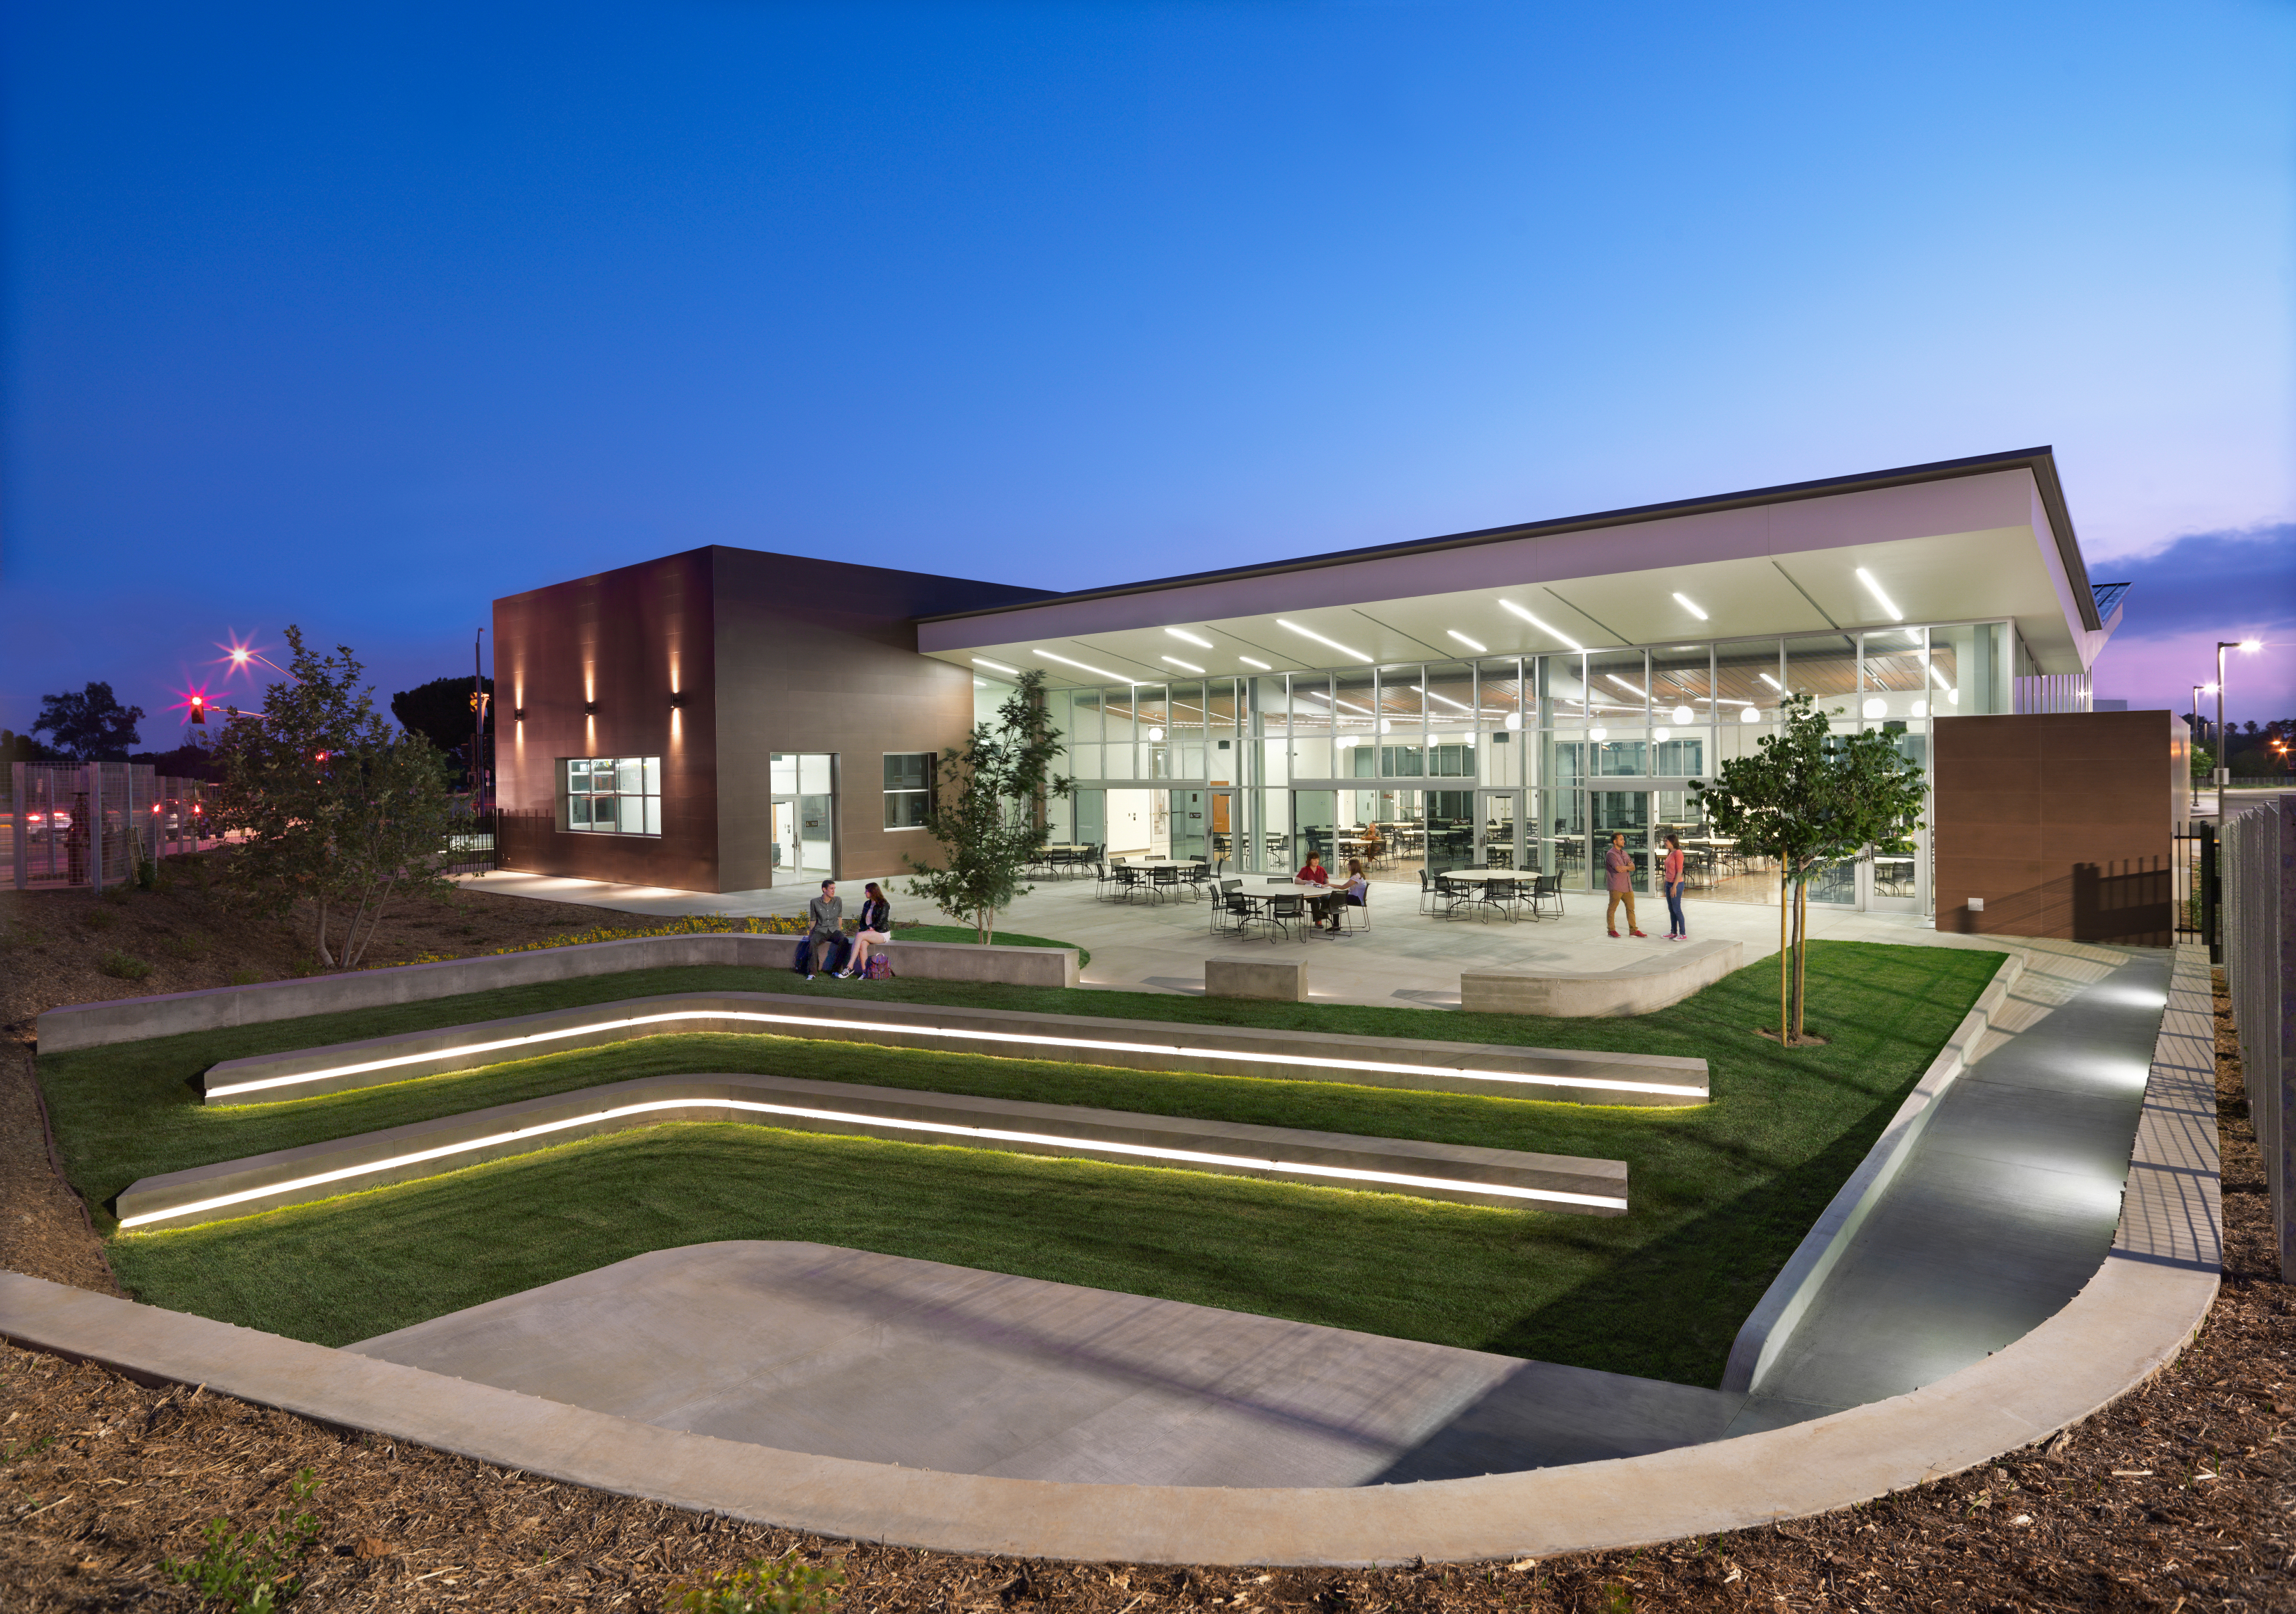 Architecture and facility management work together at Liberty Community College.